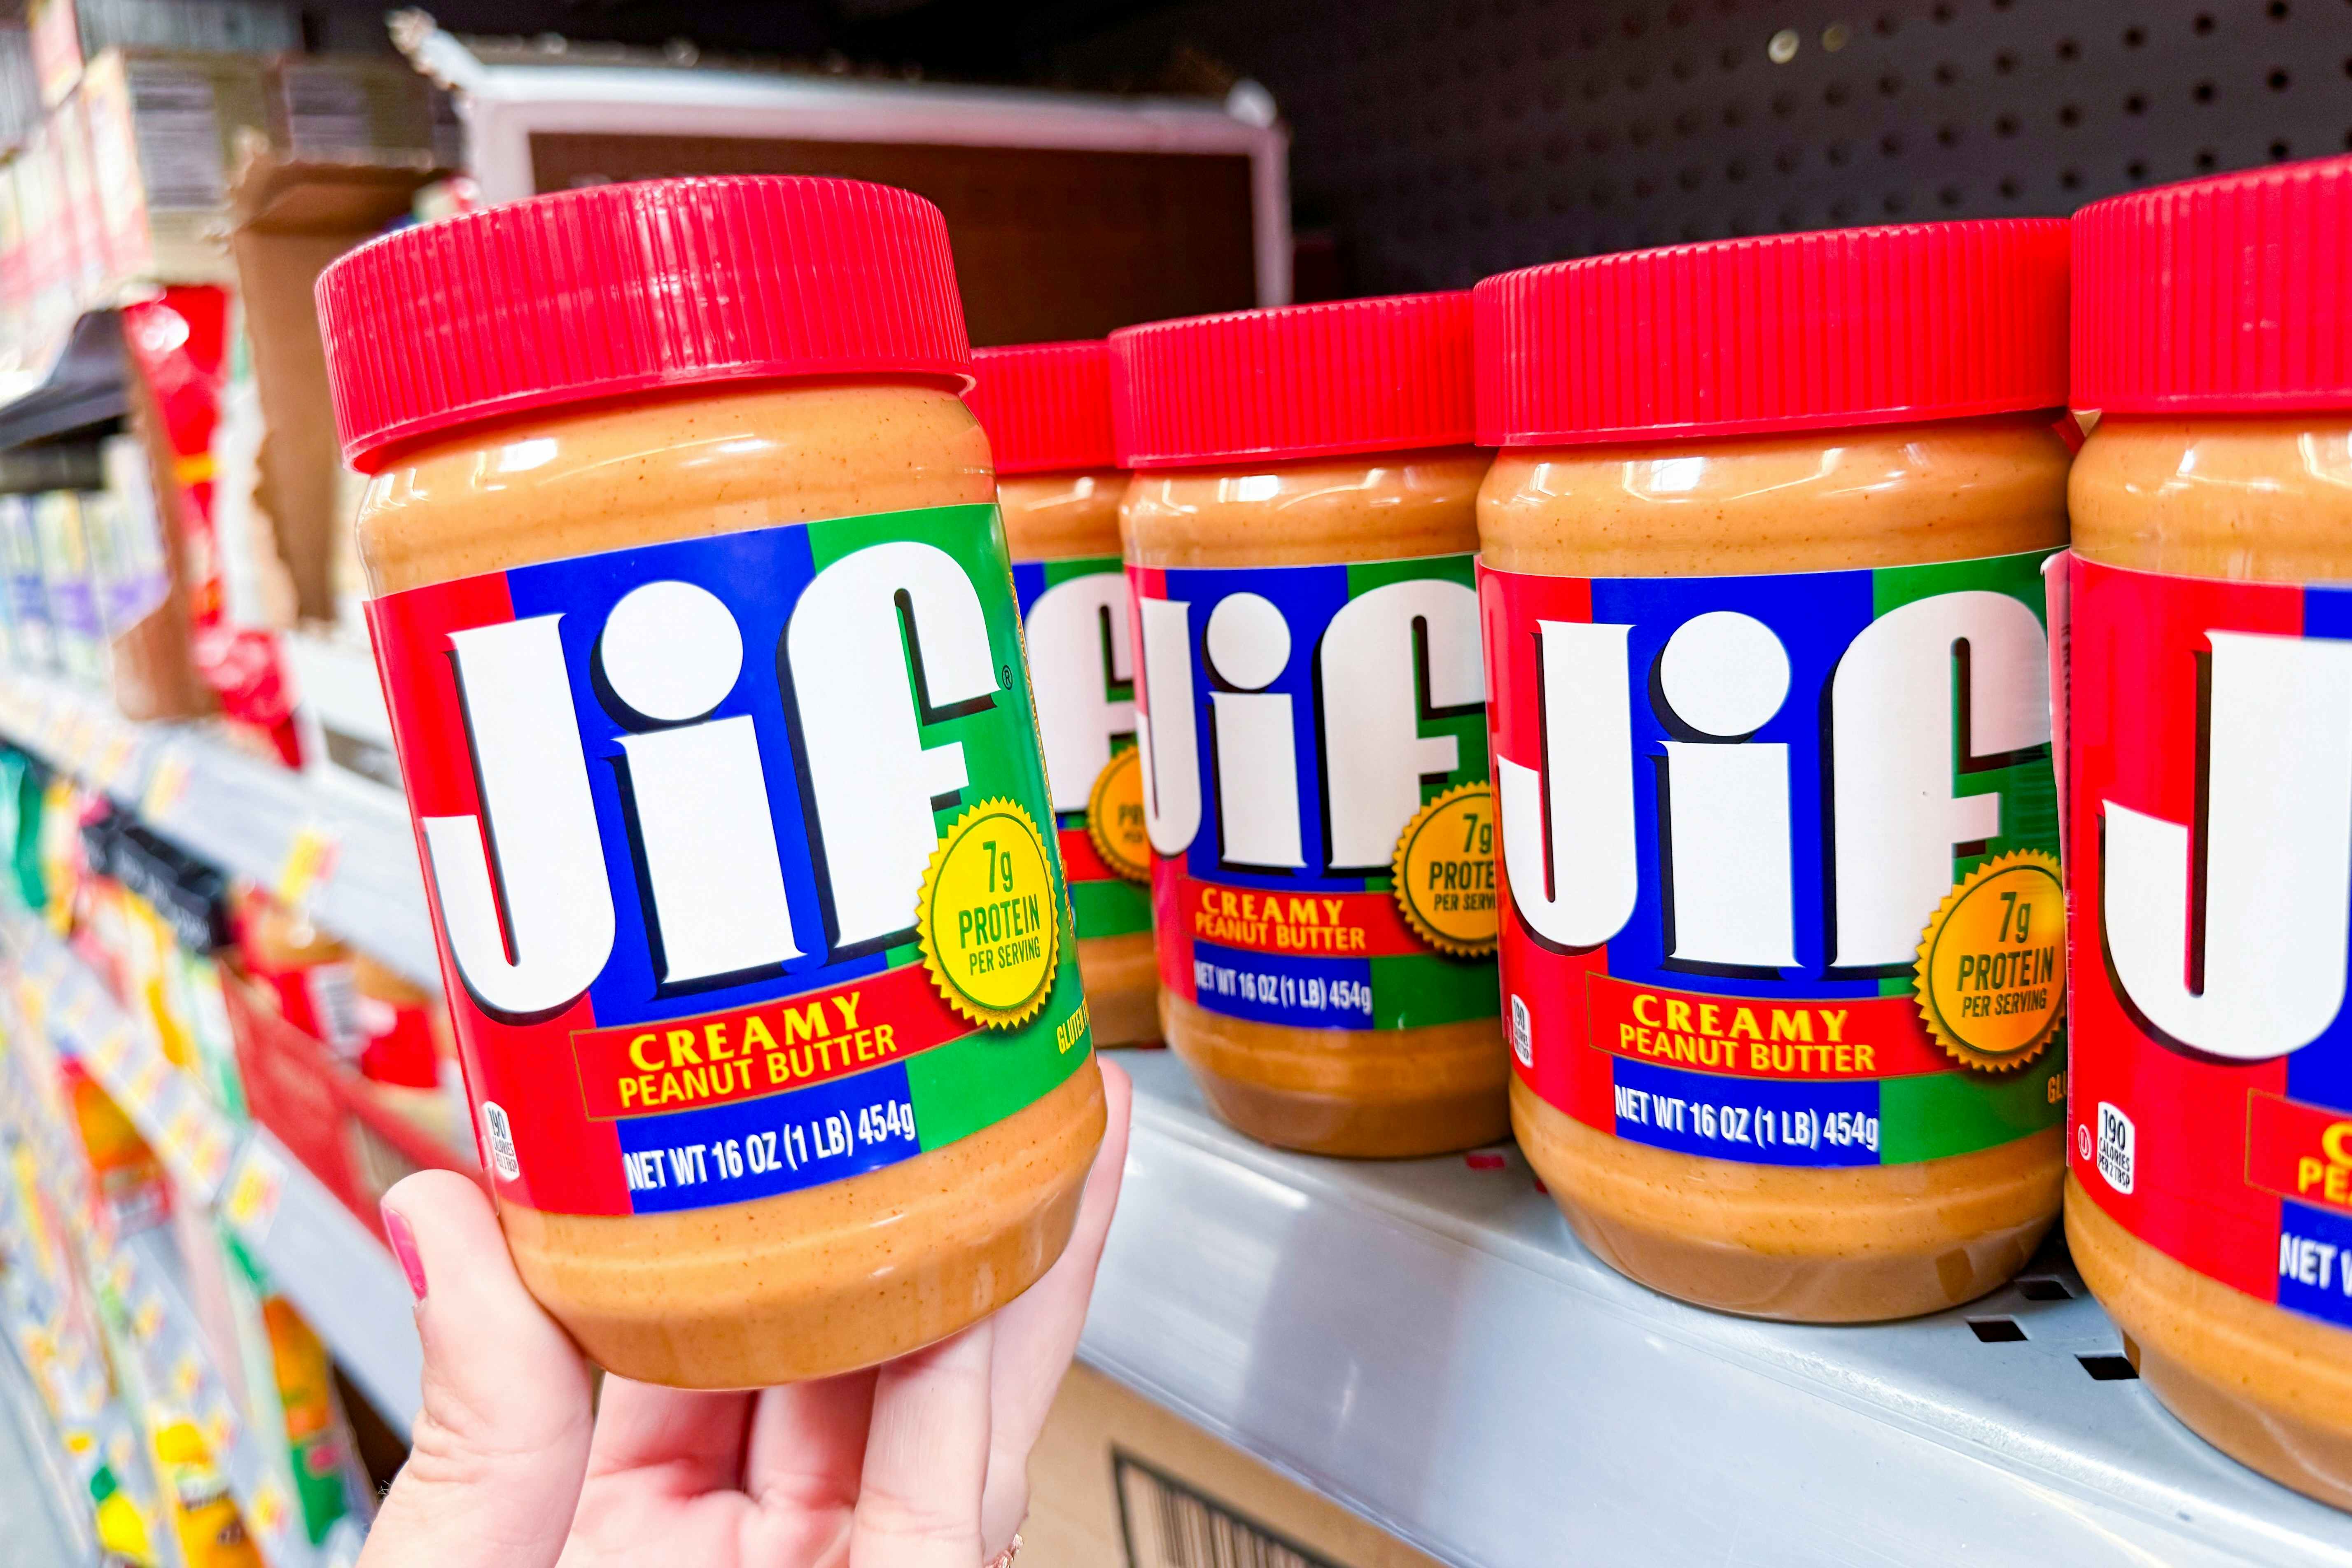 Jif Creamy Peanut Butter: Get 3 Jars for as Low as $5.83 on Amazon